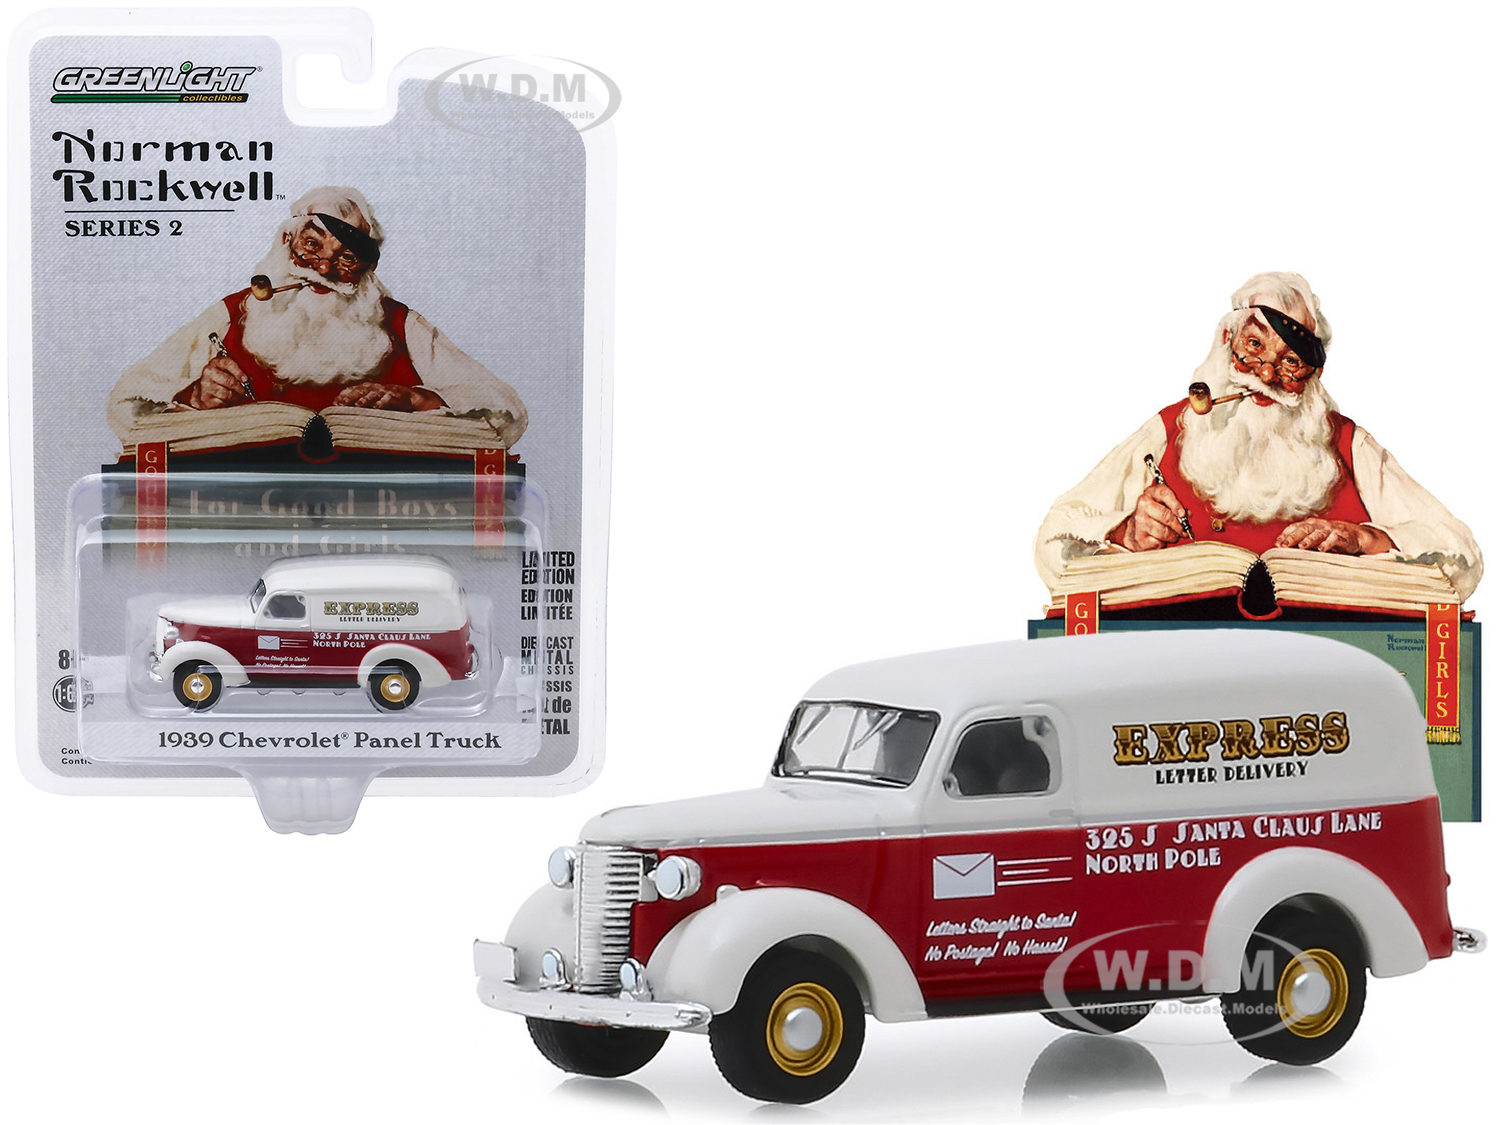 1939 Chevrolet Panel Truck Red And White "express Letter Delivery" "norman Rockwell" Series 2 1/64 Diecast Model Car By Greenlight